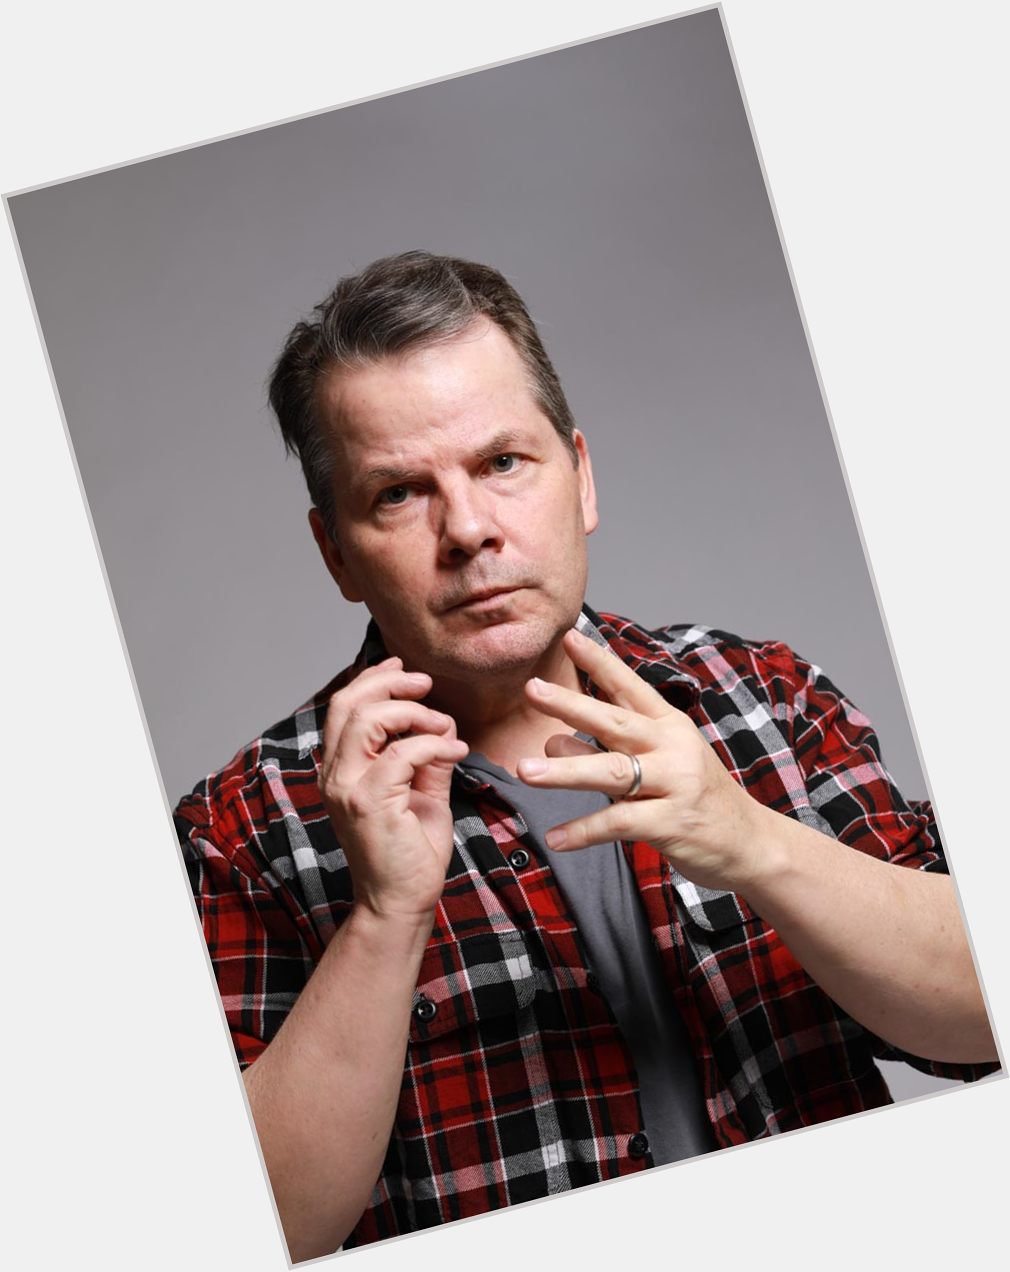 Bruce Mcculloch exclusive hot pic 10.jpg